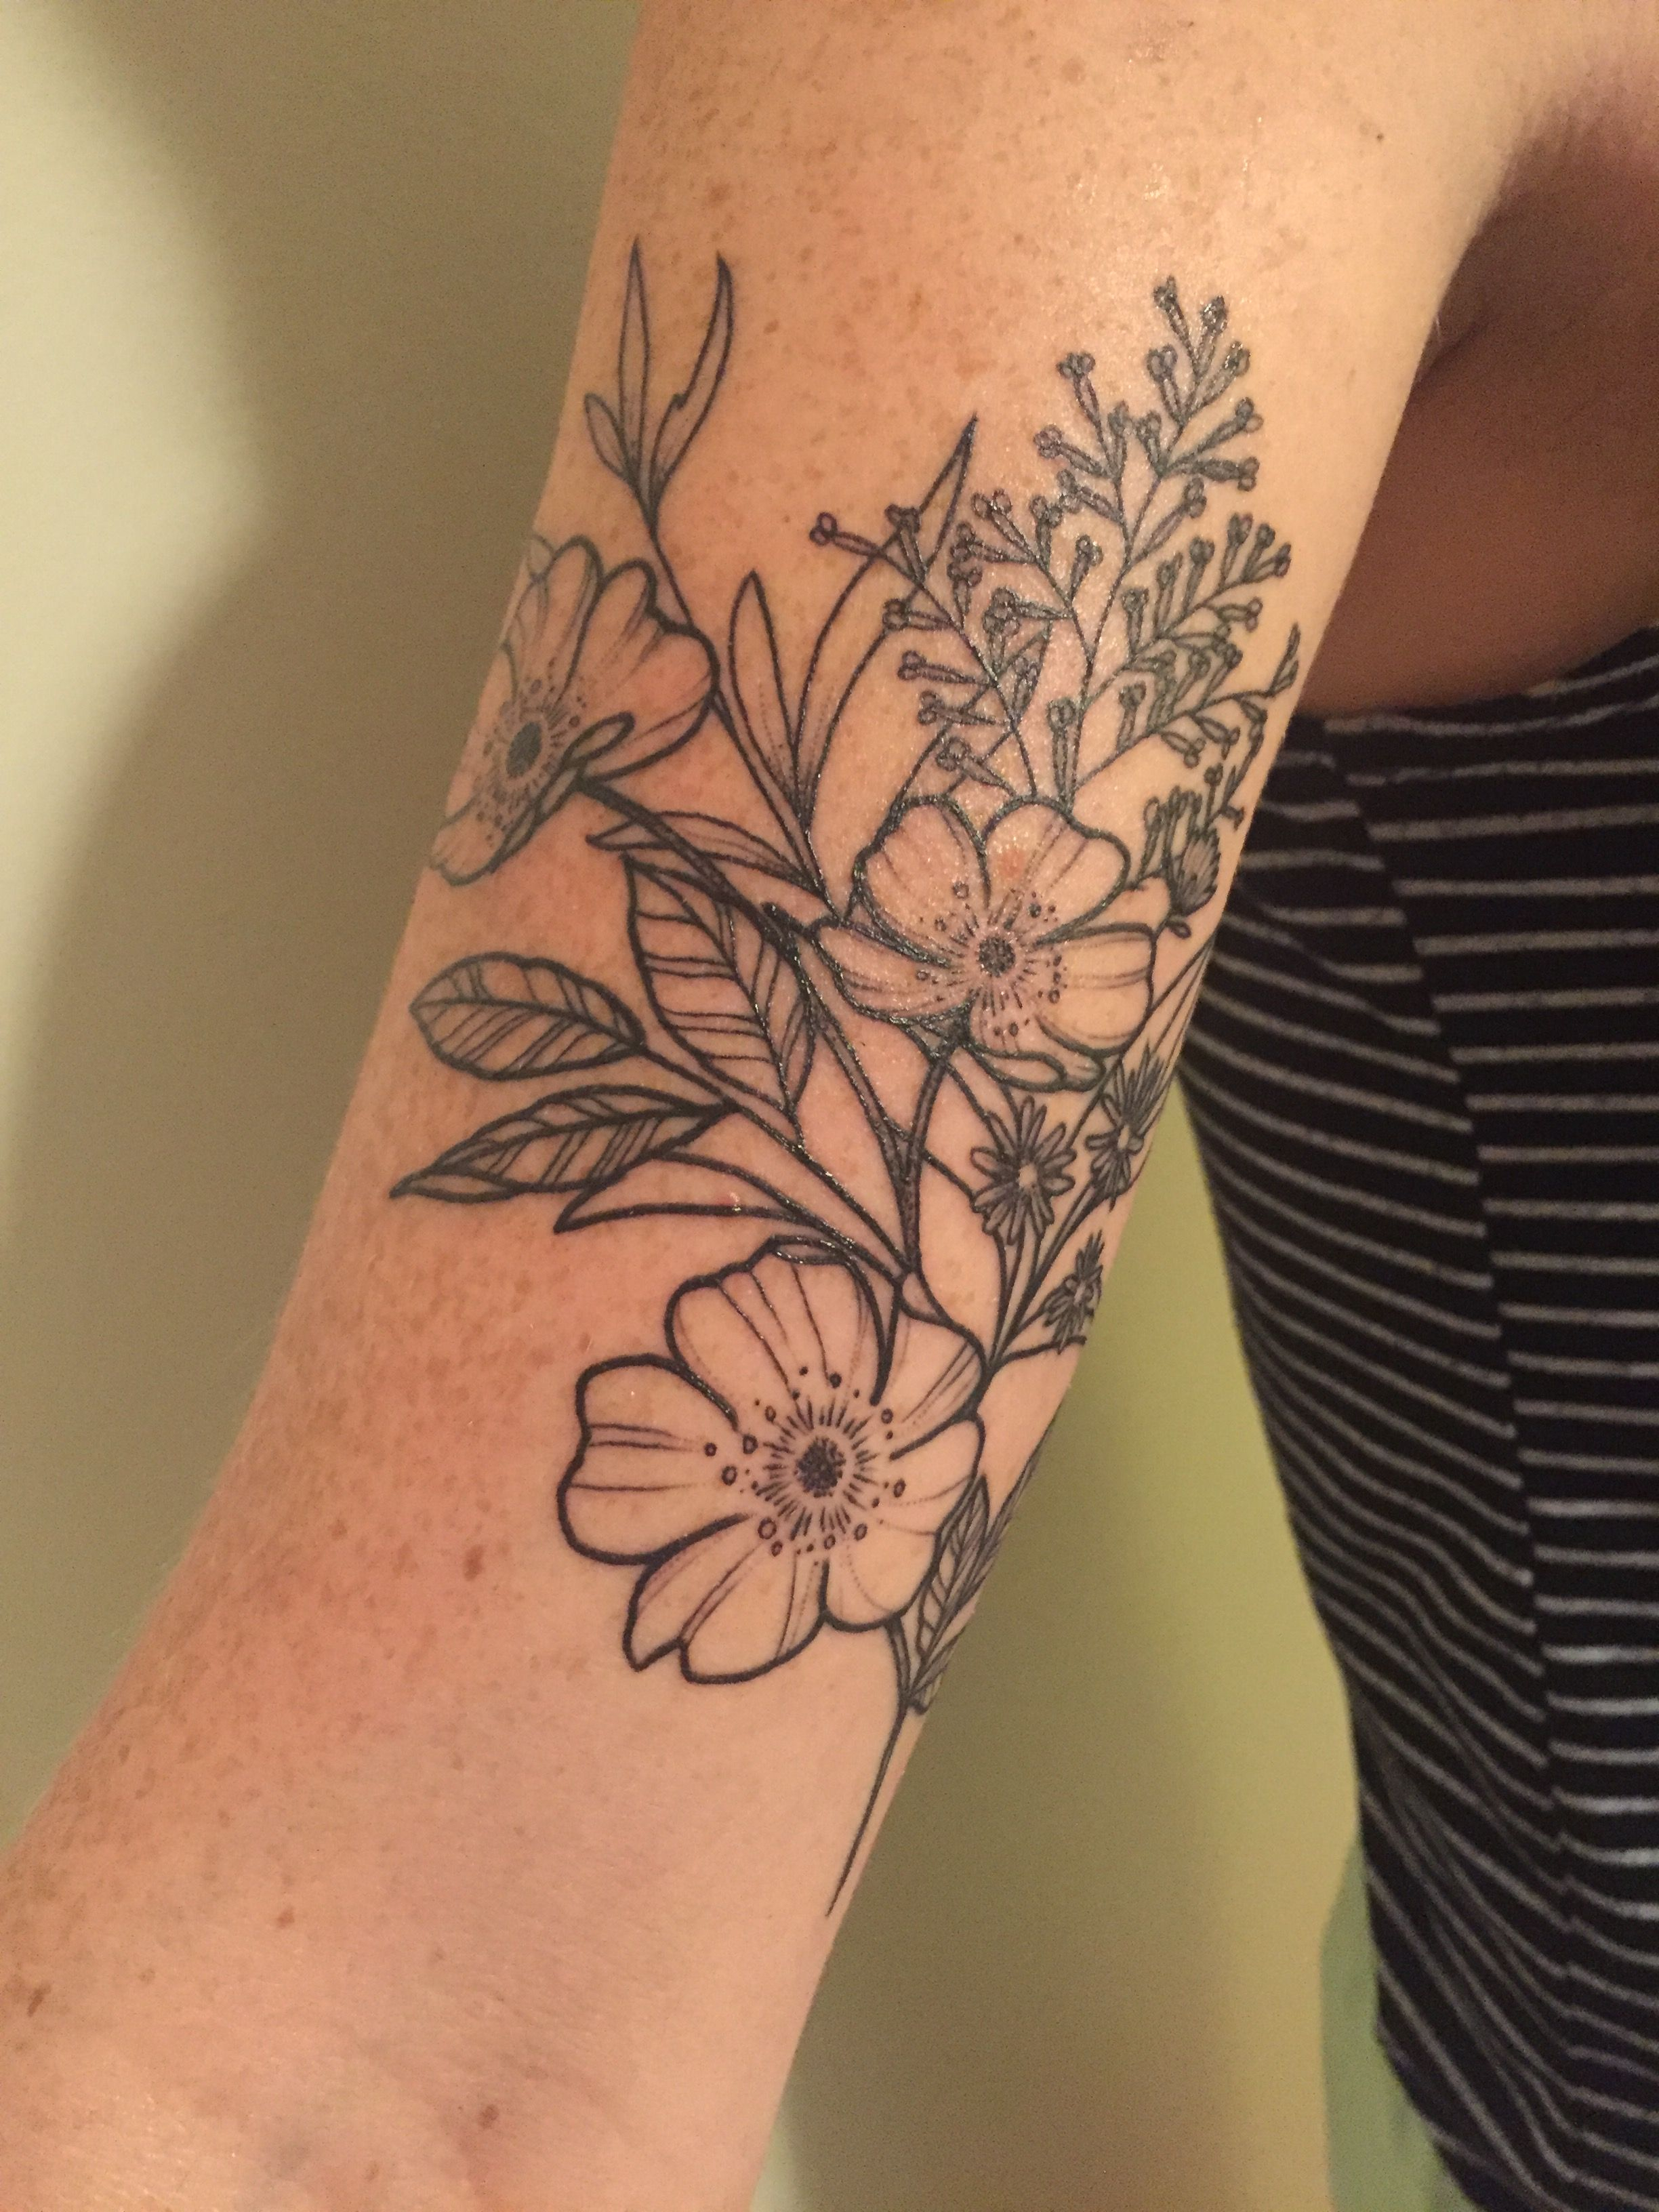 Floral Wildflower Arm Tattoo With Wild Rose Heather Aster Field pertaining to dimensions 2448 X 3264